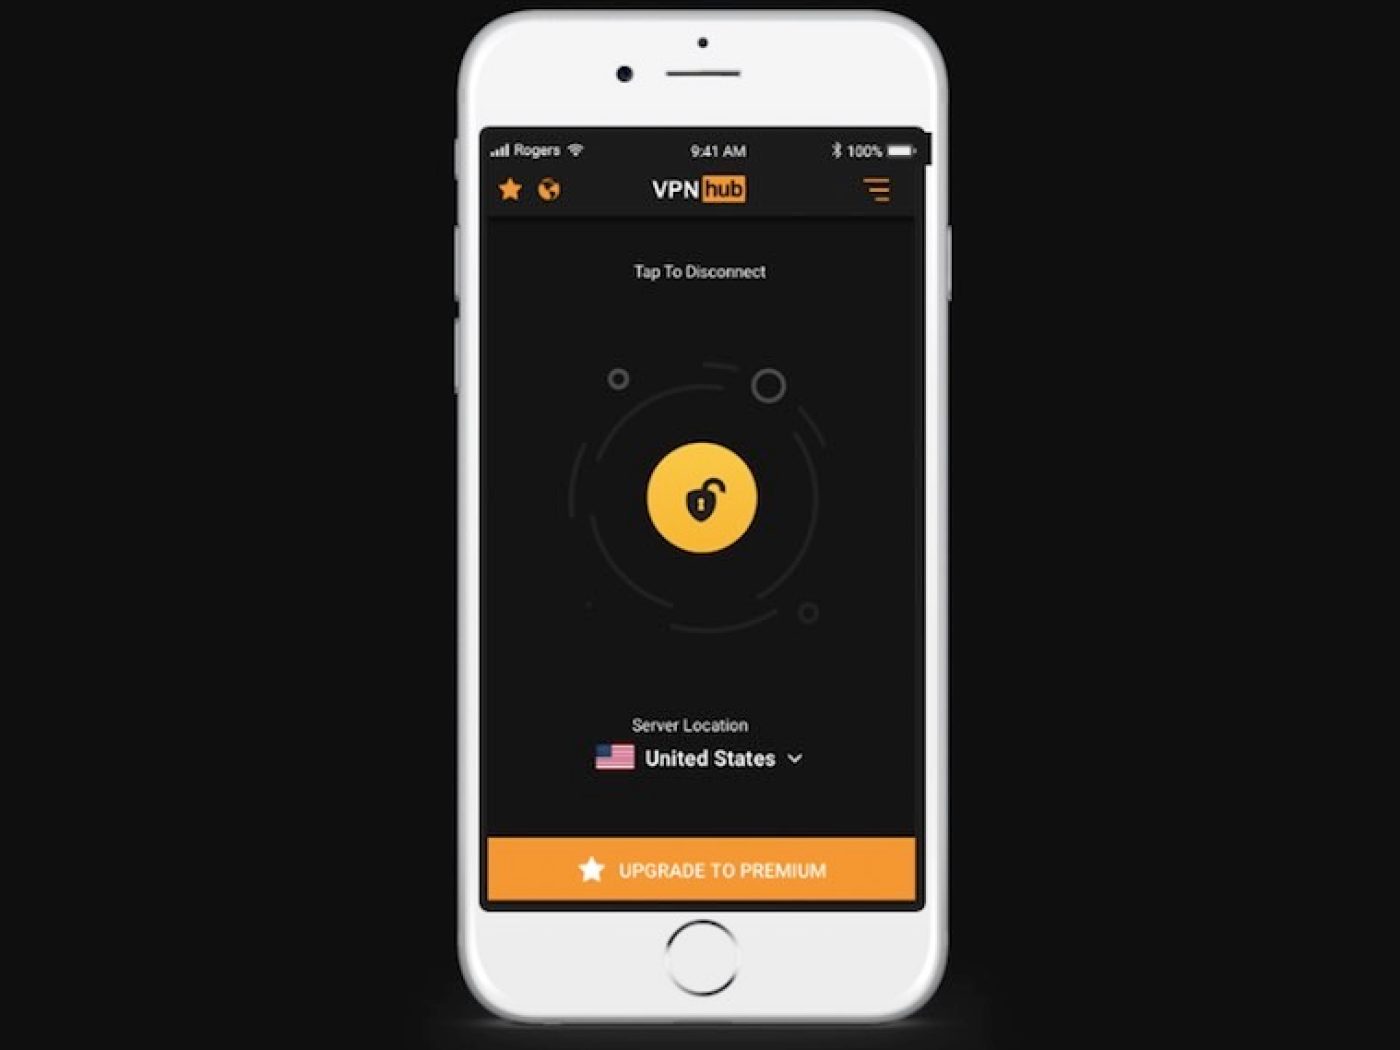 Pronhub App Download - Pornhub has launched its own VPN for the most private kind of browsing